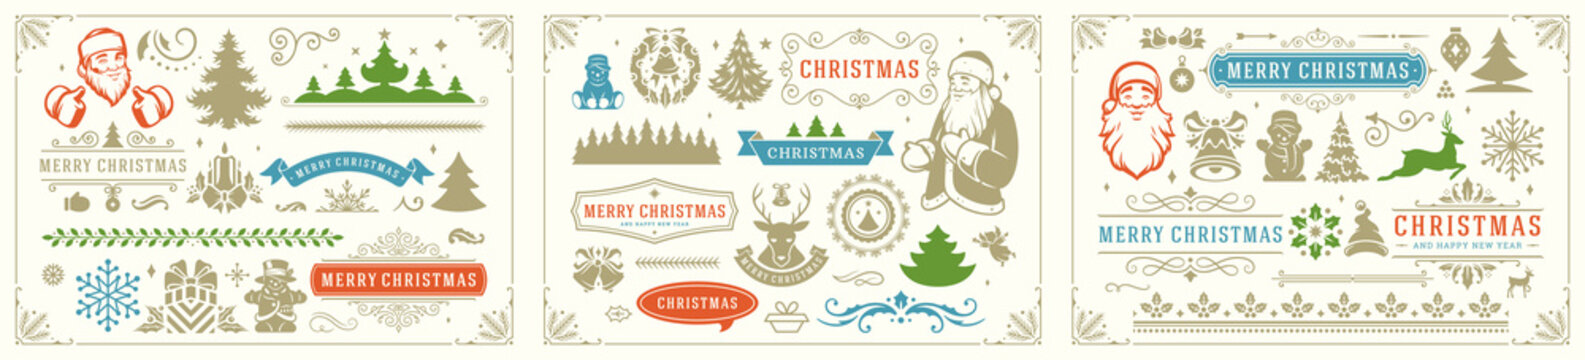 Christmas vector decoration elements with ornate vignettes and symbols set.